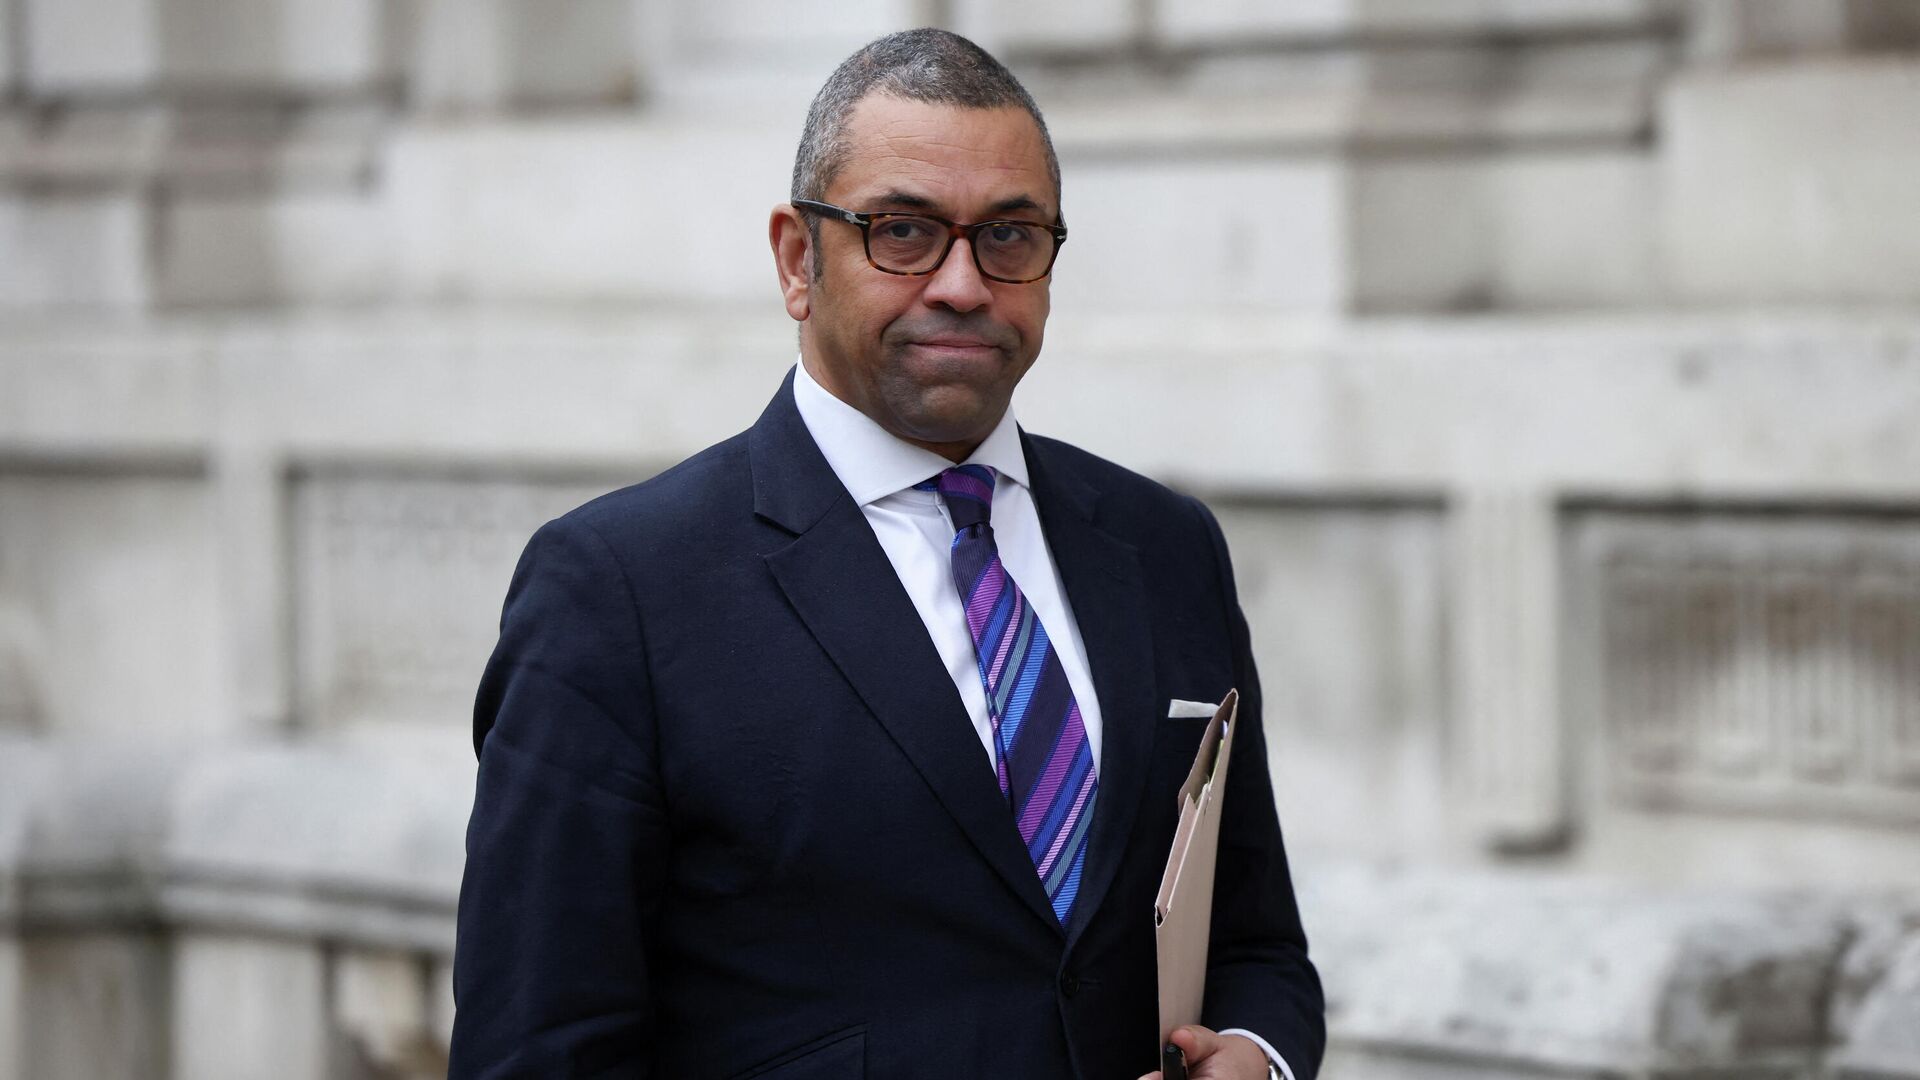 British Minister of State for Middle East, North Africa and North America James Cleverly arrives at the Cabinet Office in London, Britain, January 24, 2022 - Sputnik International, 1920, 03.02.2022